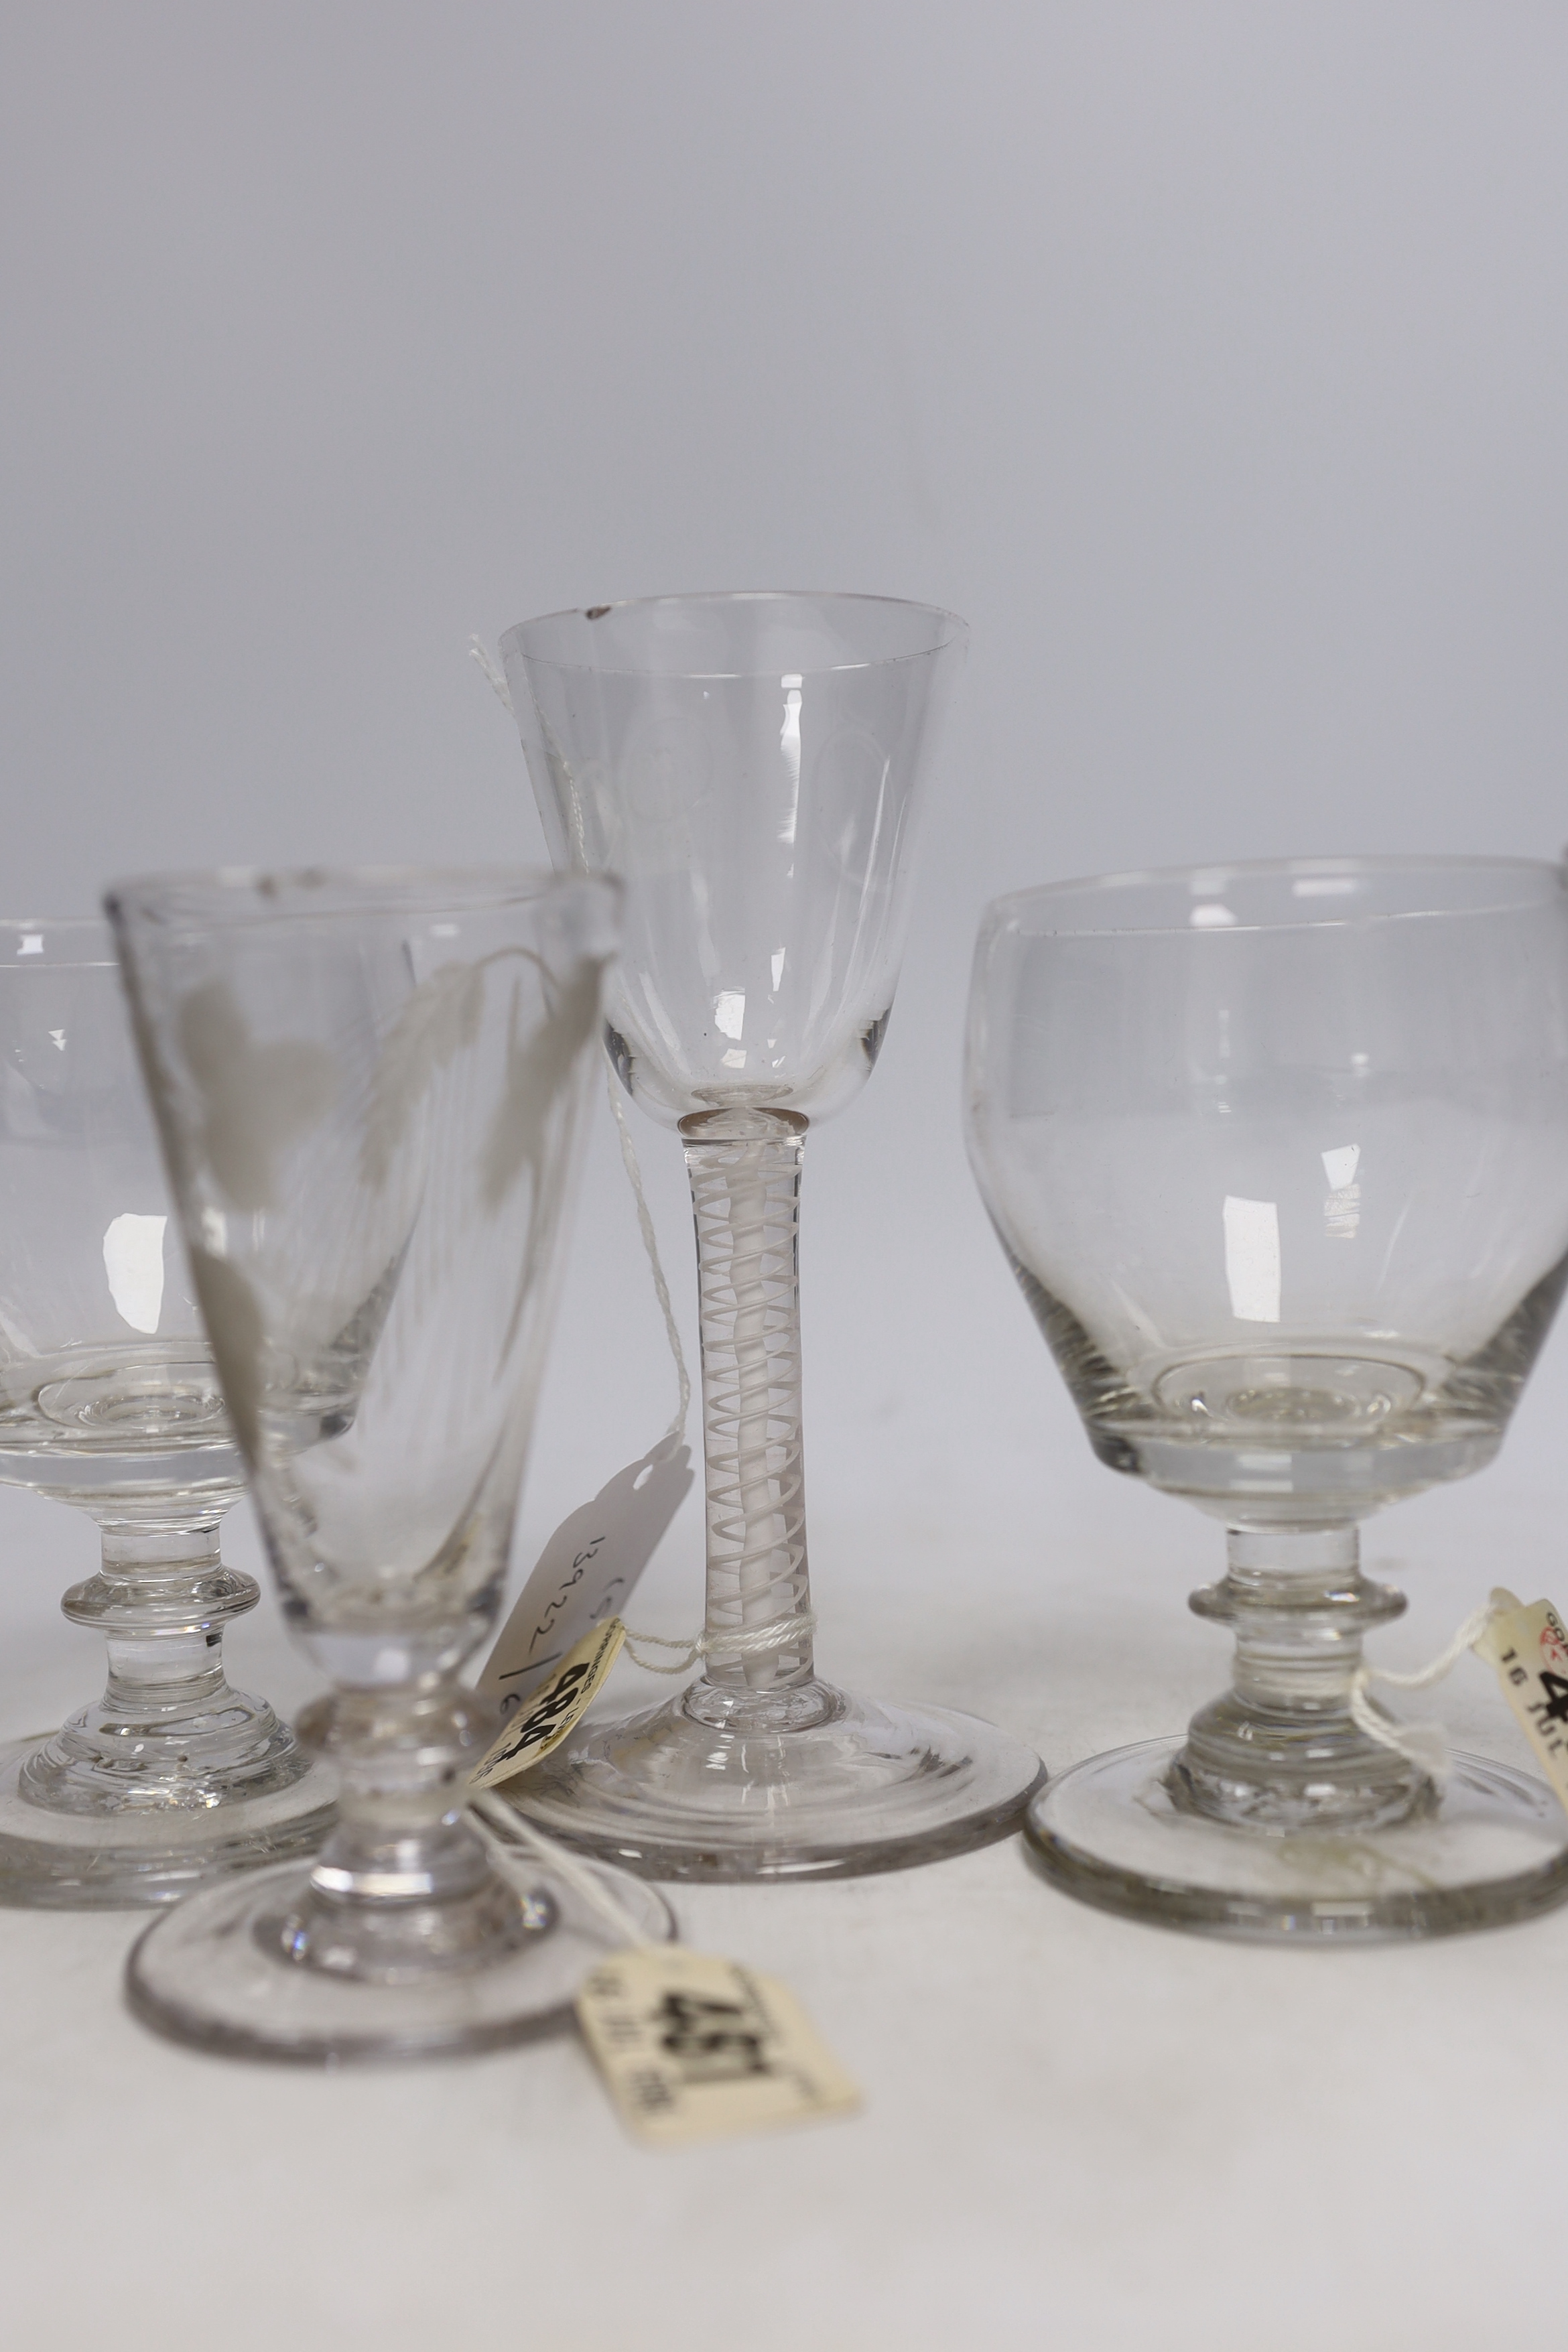 Two late 18th century DSOT Wine glasses, two dwarf ale glasses with engraved hops and barley, and - Image 3 of 4